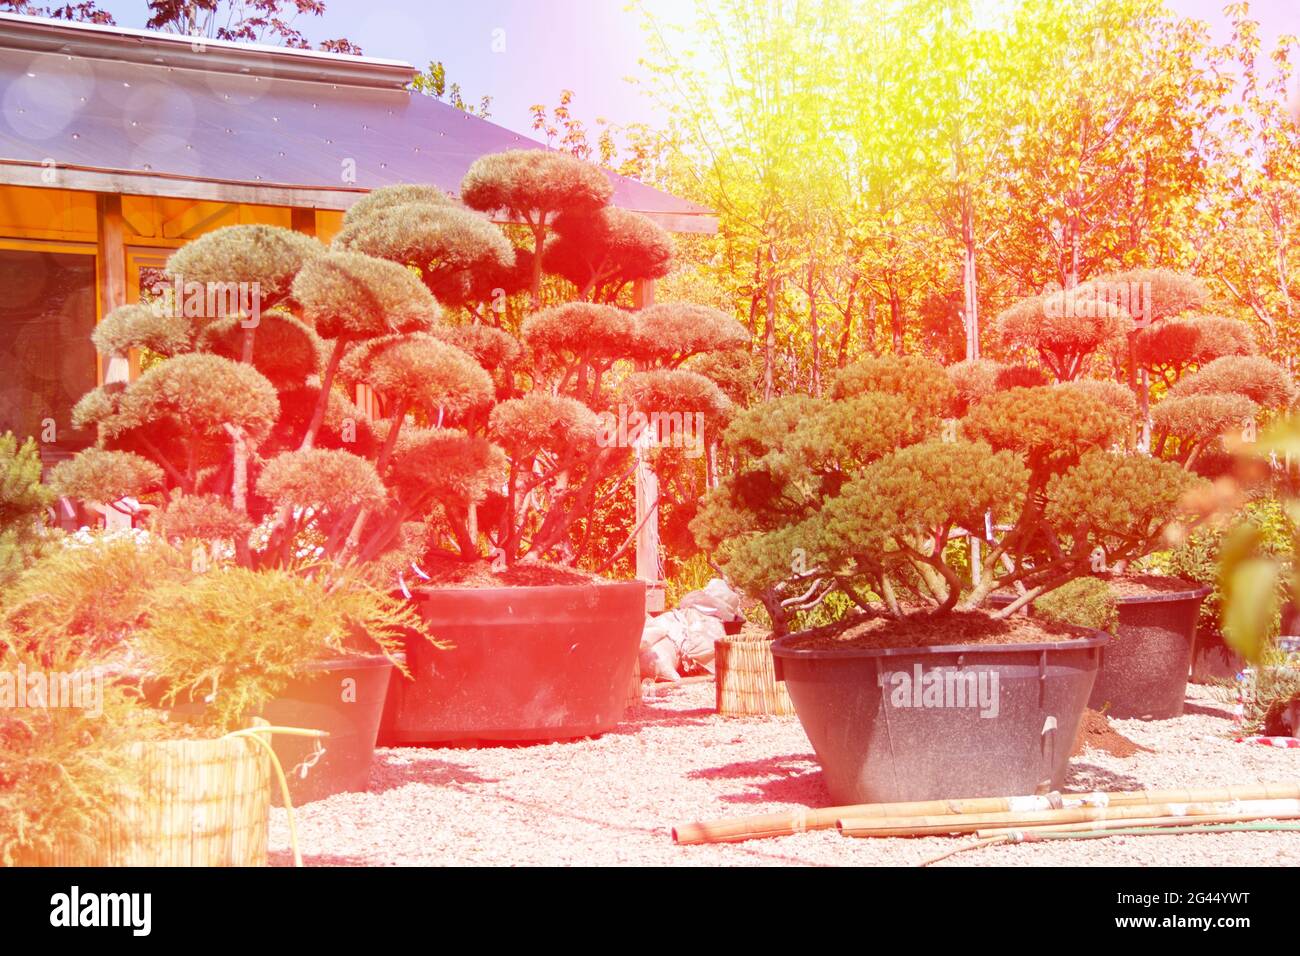 Sale of seedlings in the plant nursery. Decorative trimmed conifers for the garden landscape. Summer day with sun glare. Tinted image. Stock Photo